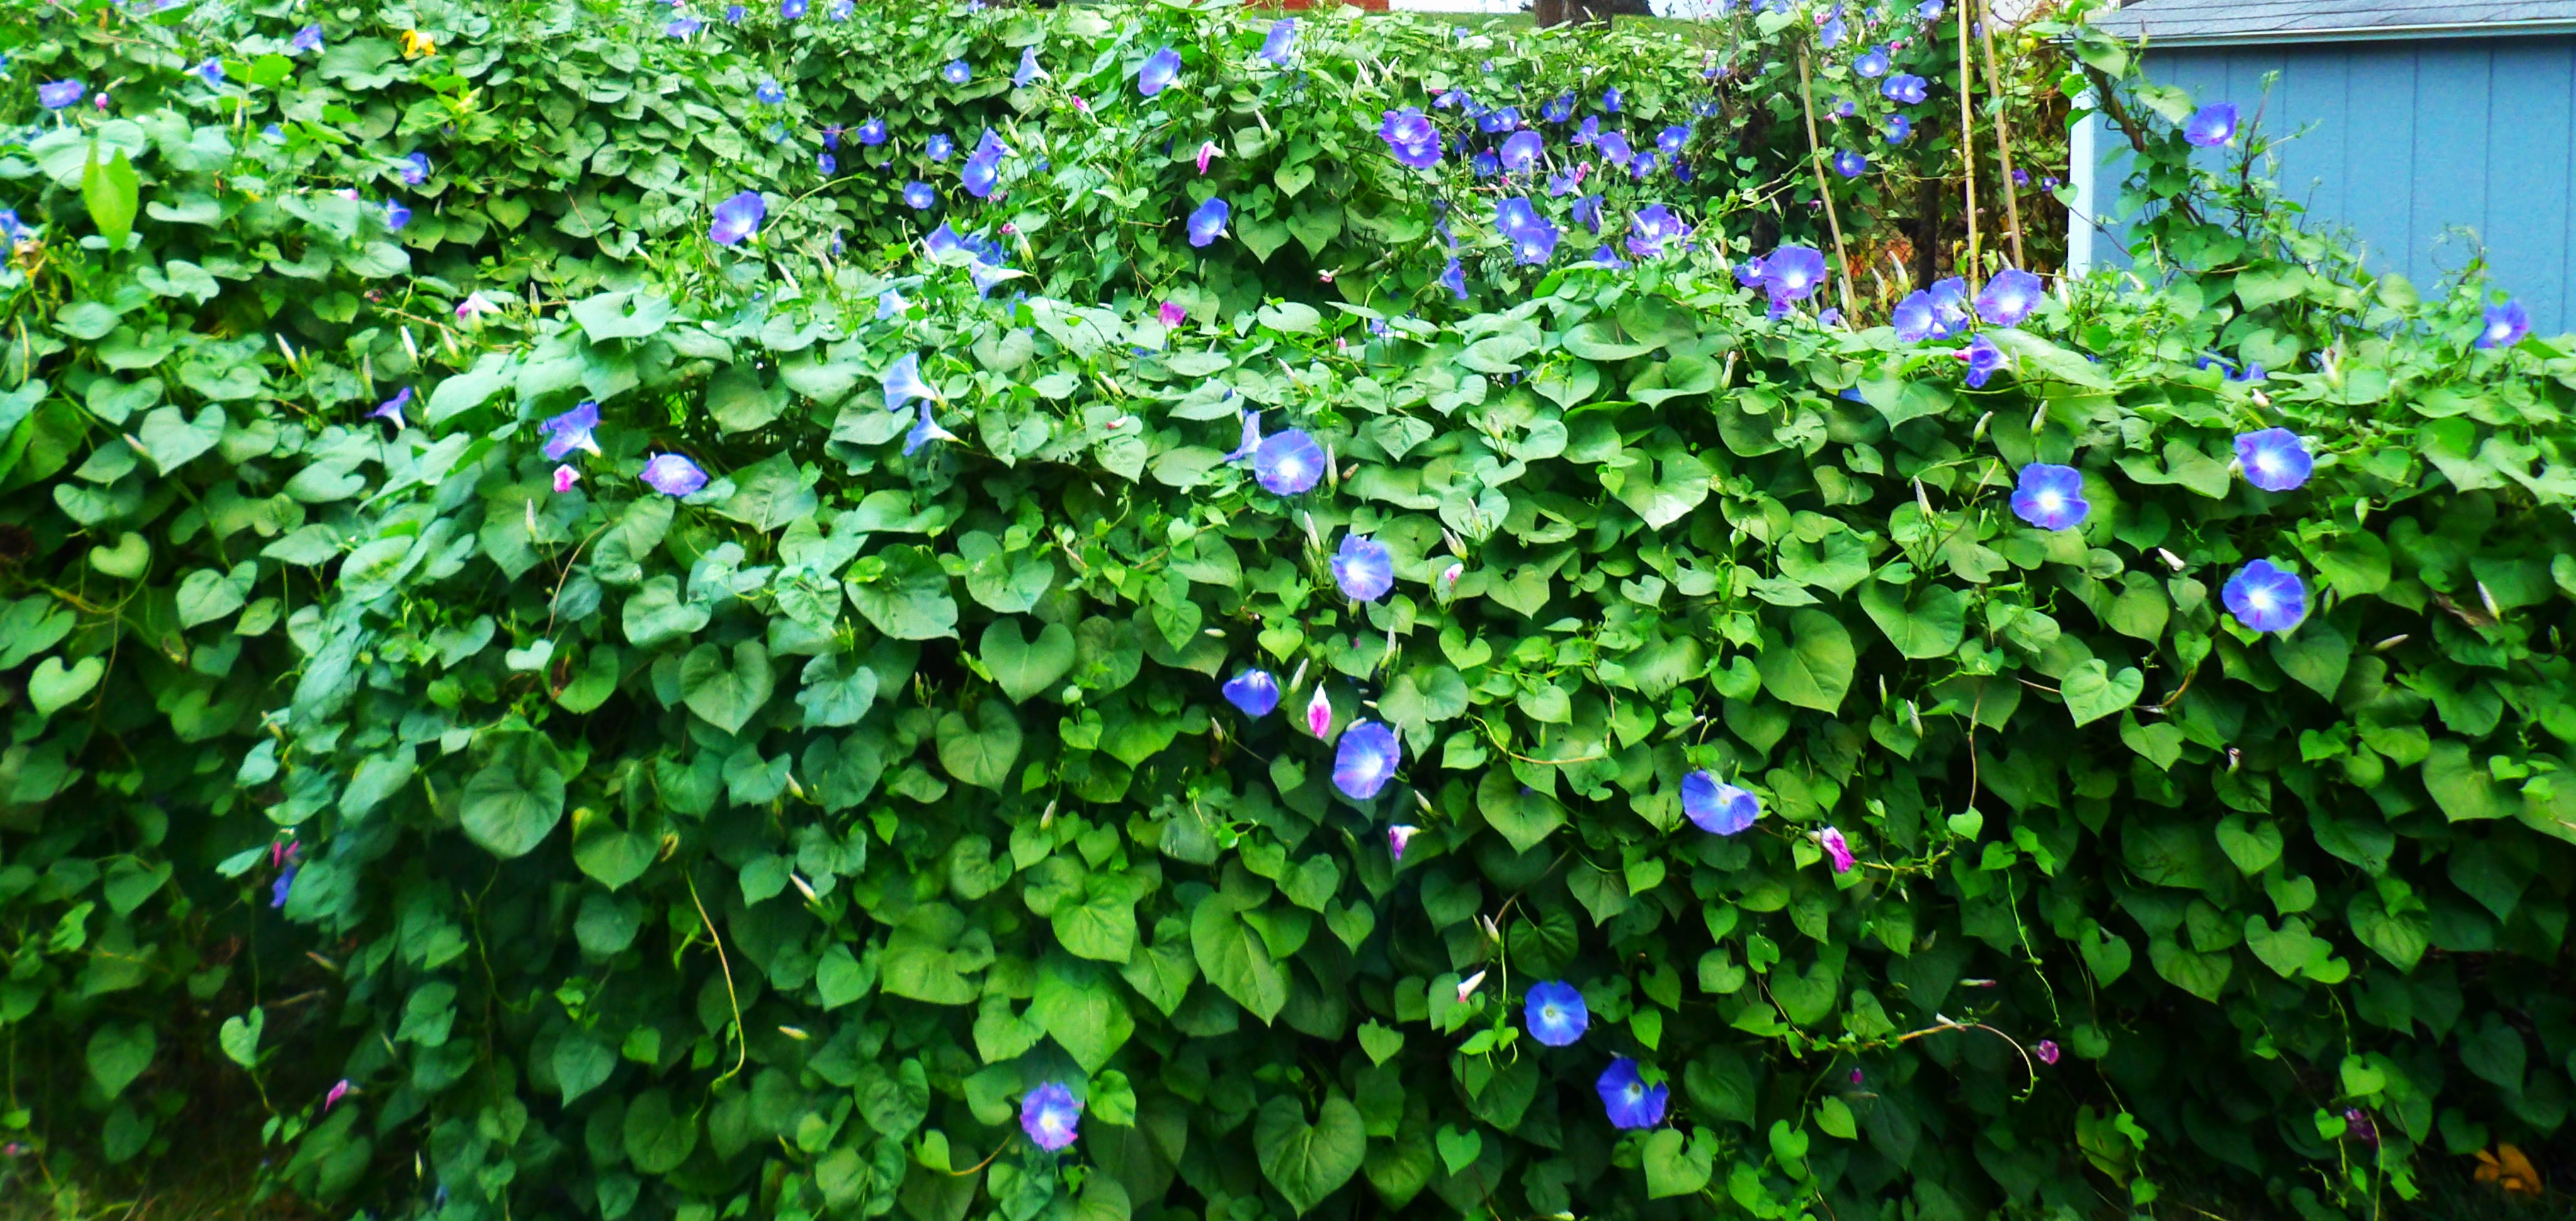 A lush bush of morning glories in bloom